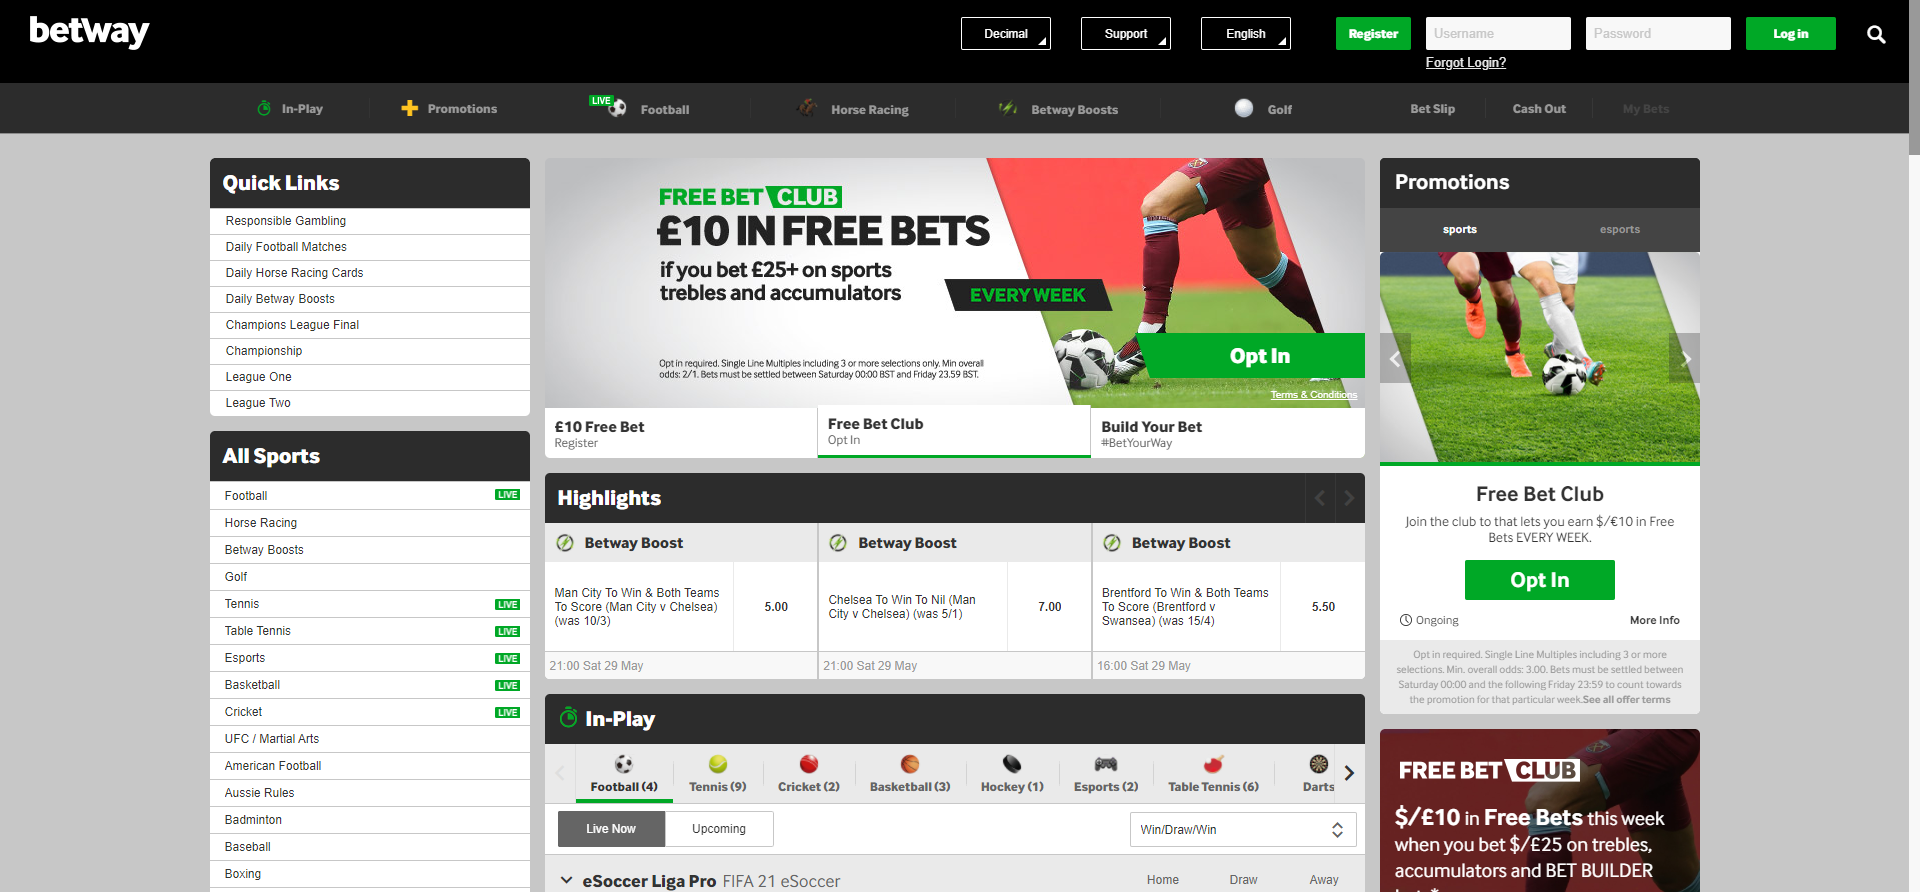 Tanzania sports betting companies in the uk dafabet mobile betting apps